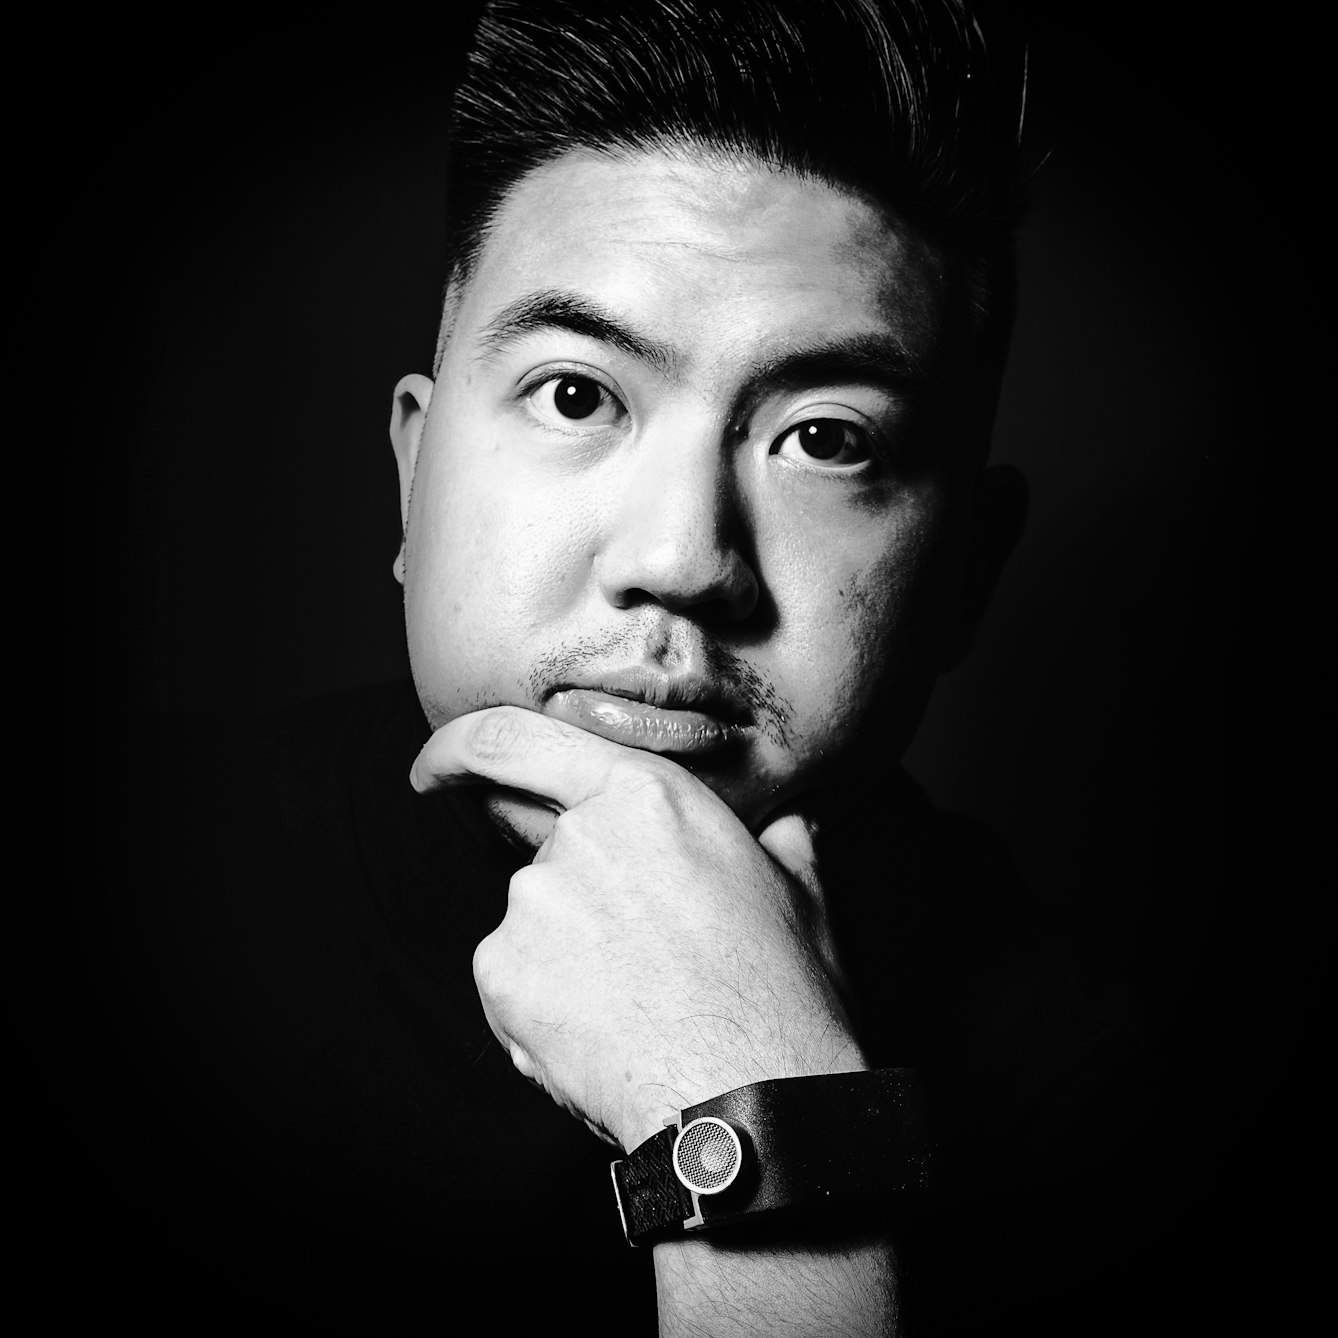 Black and white head and shoulders photographic portrait of Alex Lee.